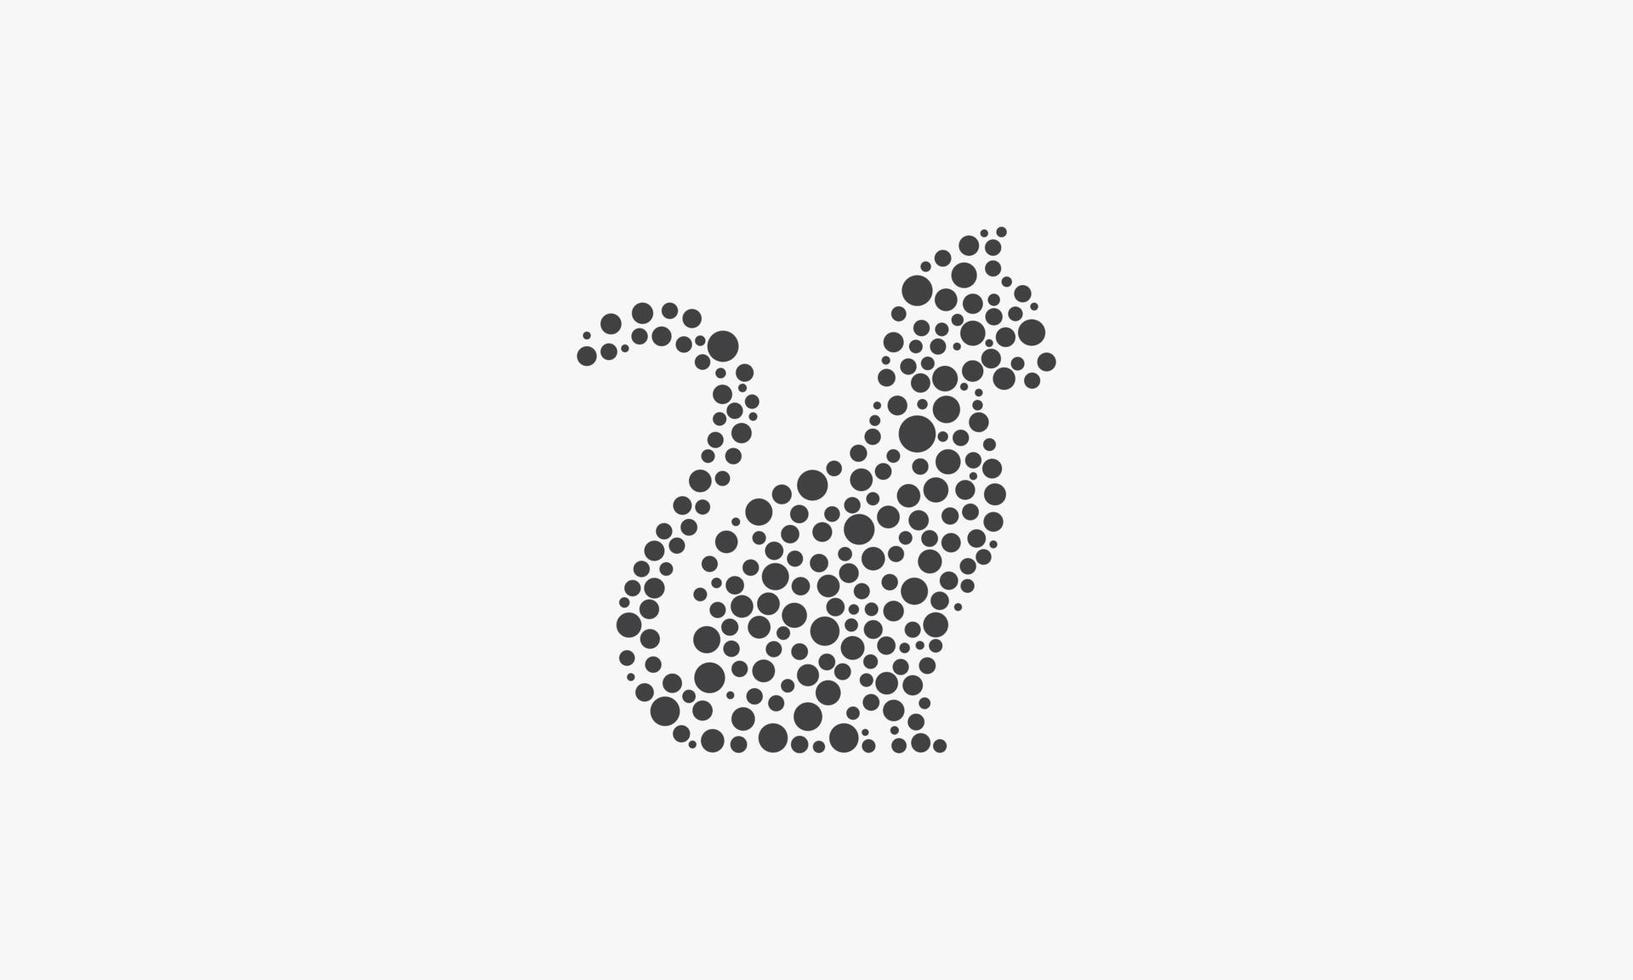 dotted bubble shape cat icon. vector illustration.isolated on white background.